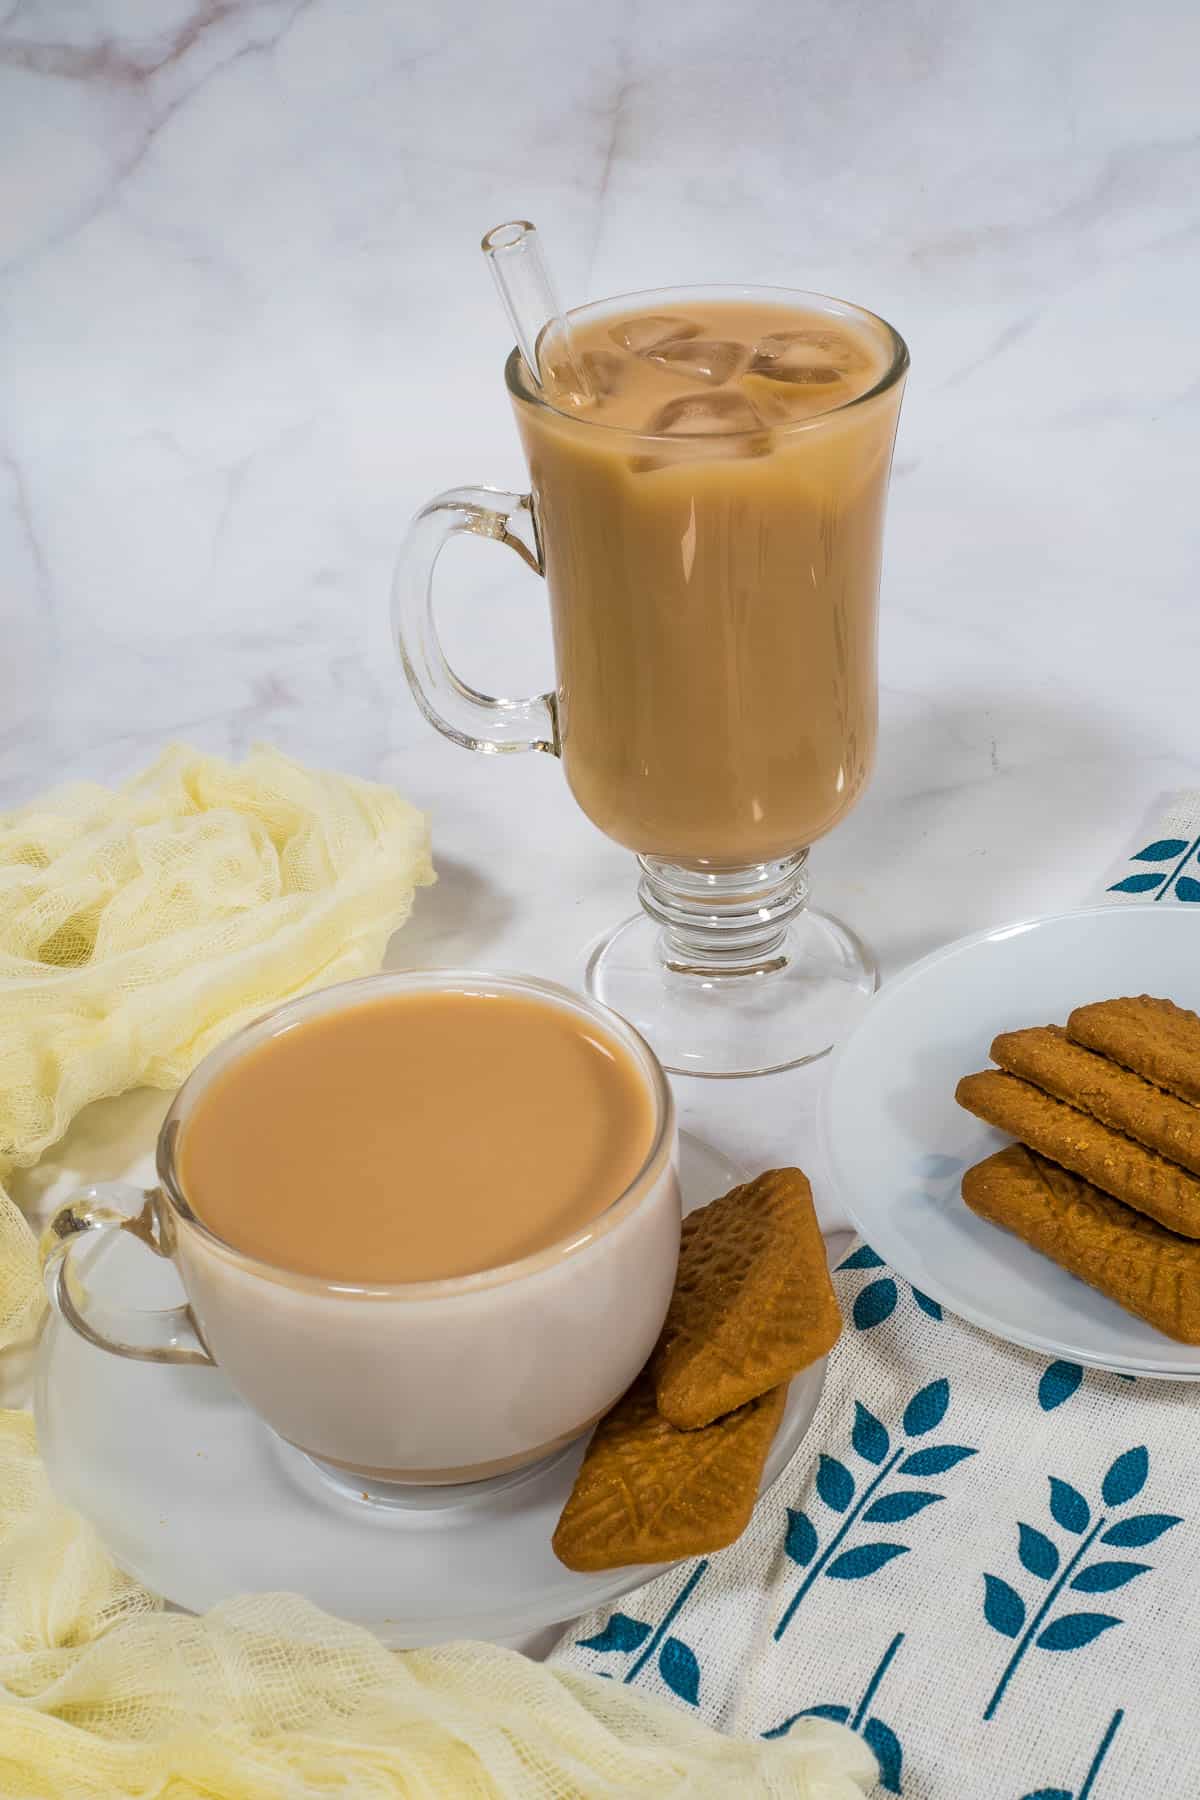 A glass of iced tea and a cup of hot tea with biscuits on the side.